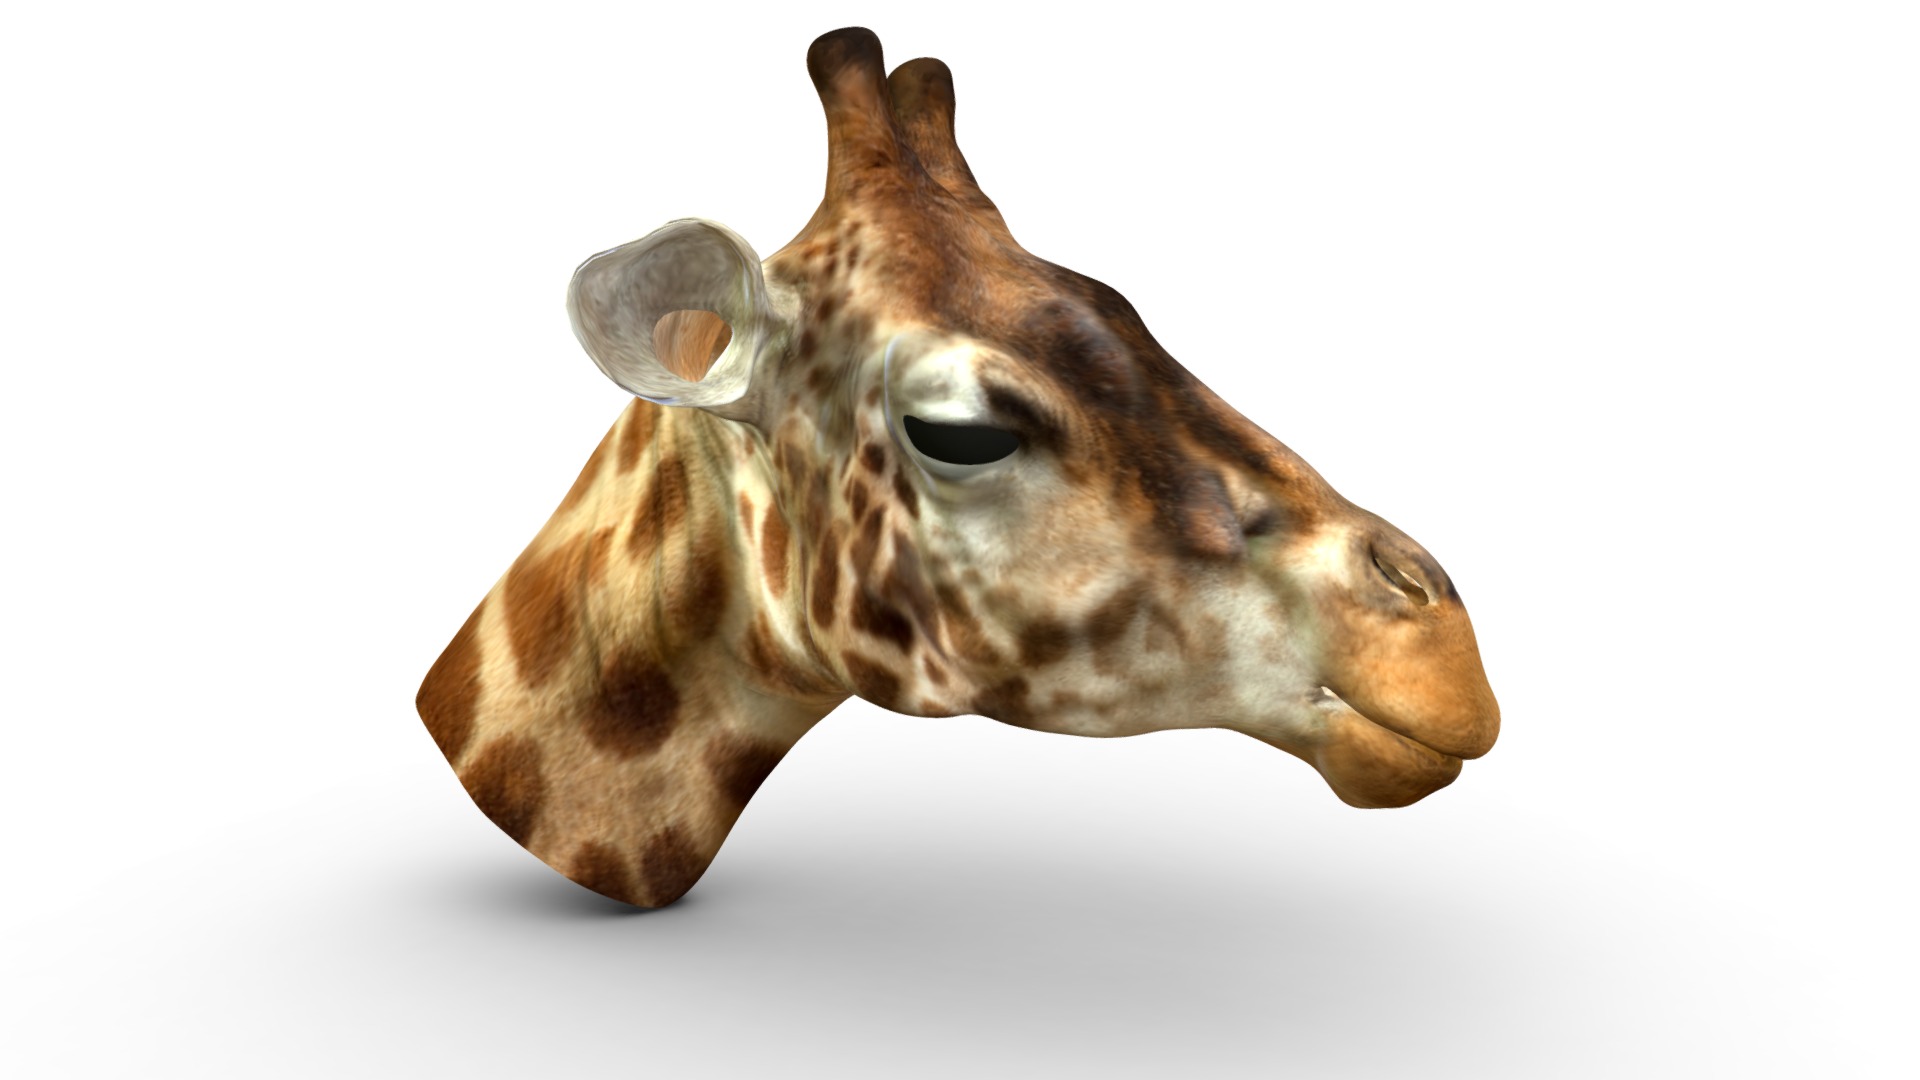 3D model Giraffe - This is a 3D model of the Giraffe. The 3D model is about a giraffe with its head tilted.